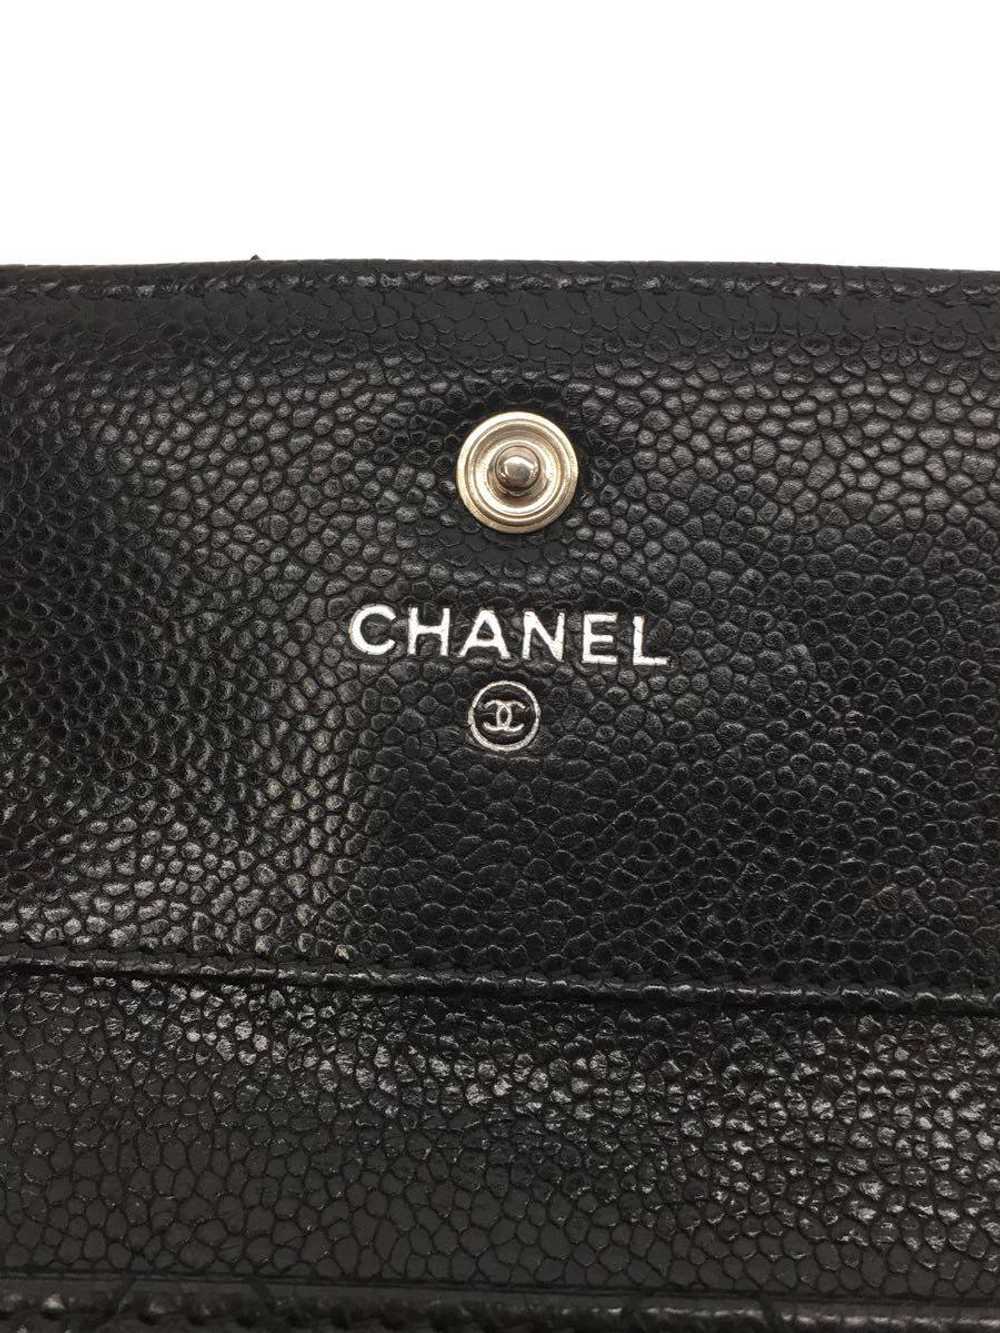 [Used in Japan Wallet] Used Chanel Wallet Purchas… - image 3